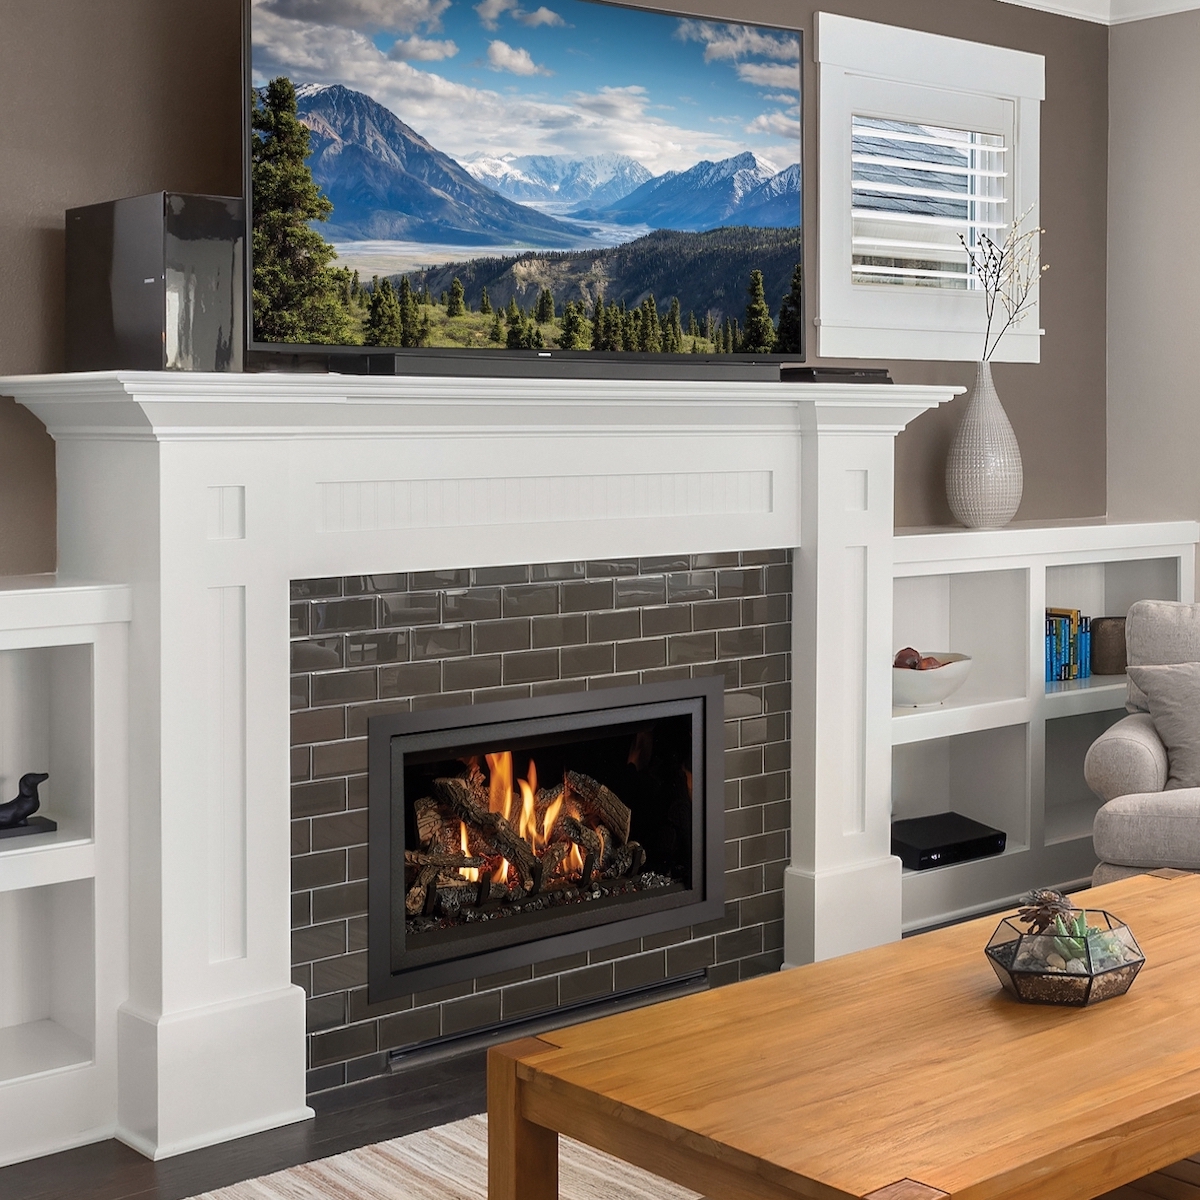 traditional, dark brick fireplace with white mantel